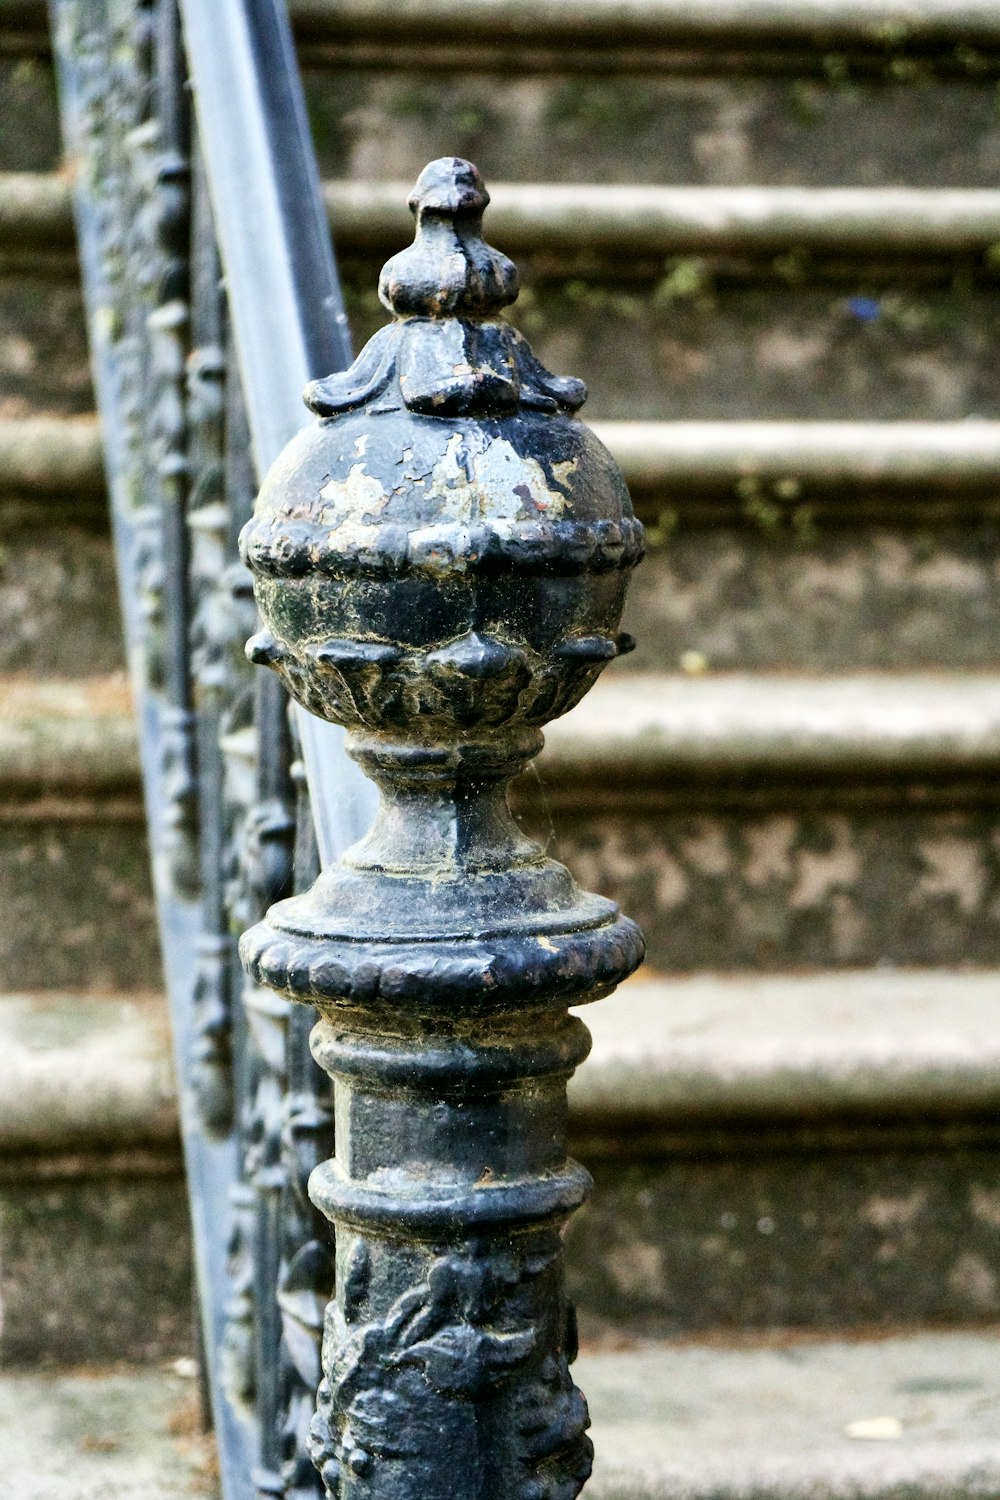 a close up of a metal railing near a set of stairs